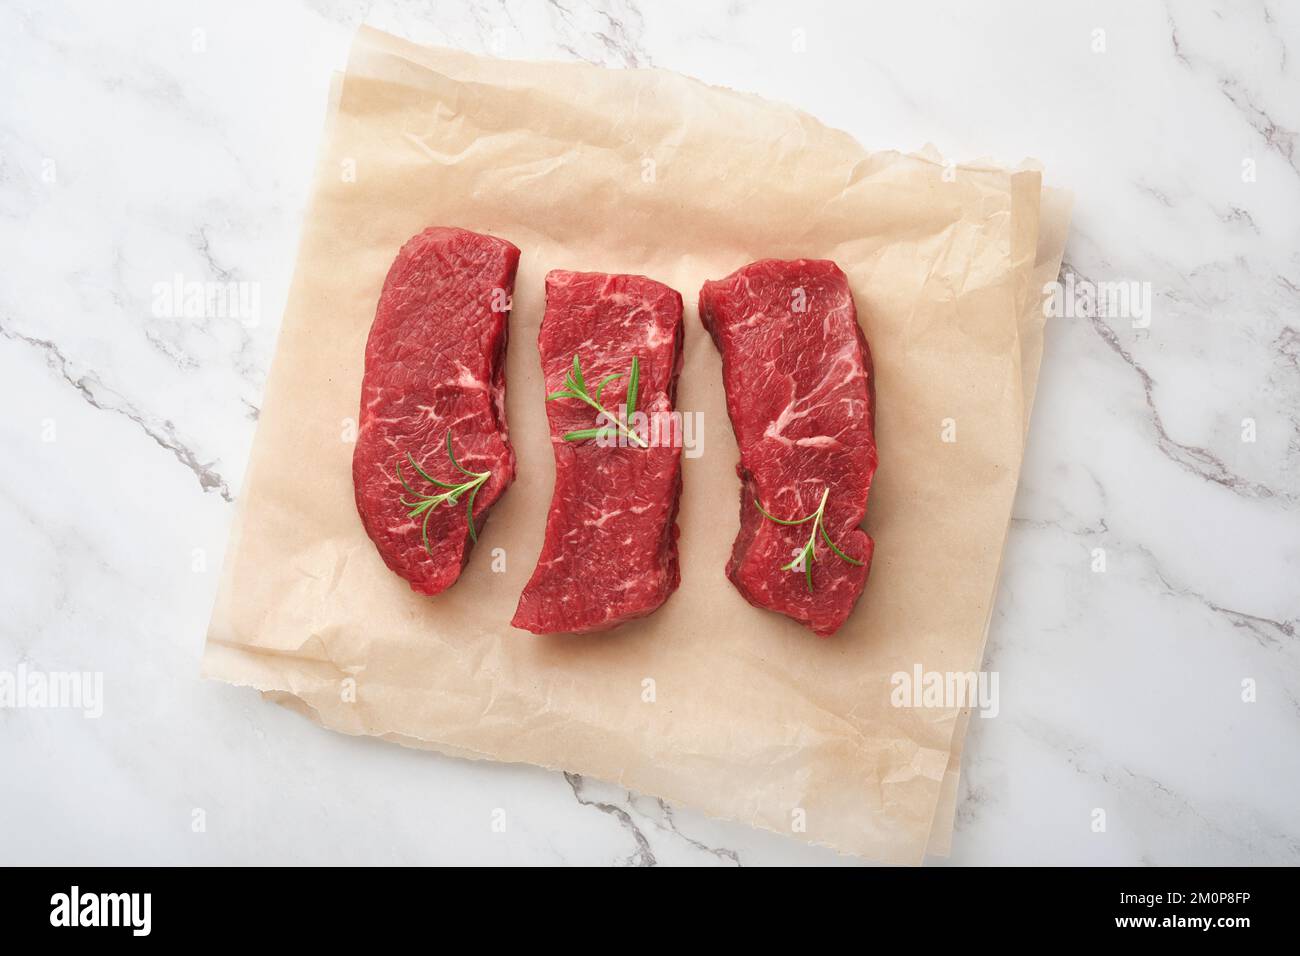 Raw steaks. Top blade steaks on wood burning board with spices, rosemary, vegetables and ingredients for cooking on parchment paper on white backgroun Stock Photo